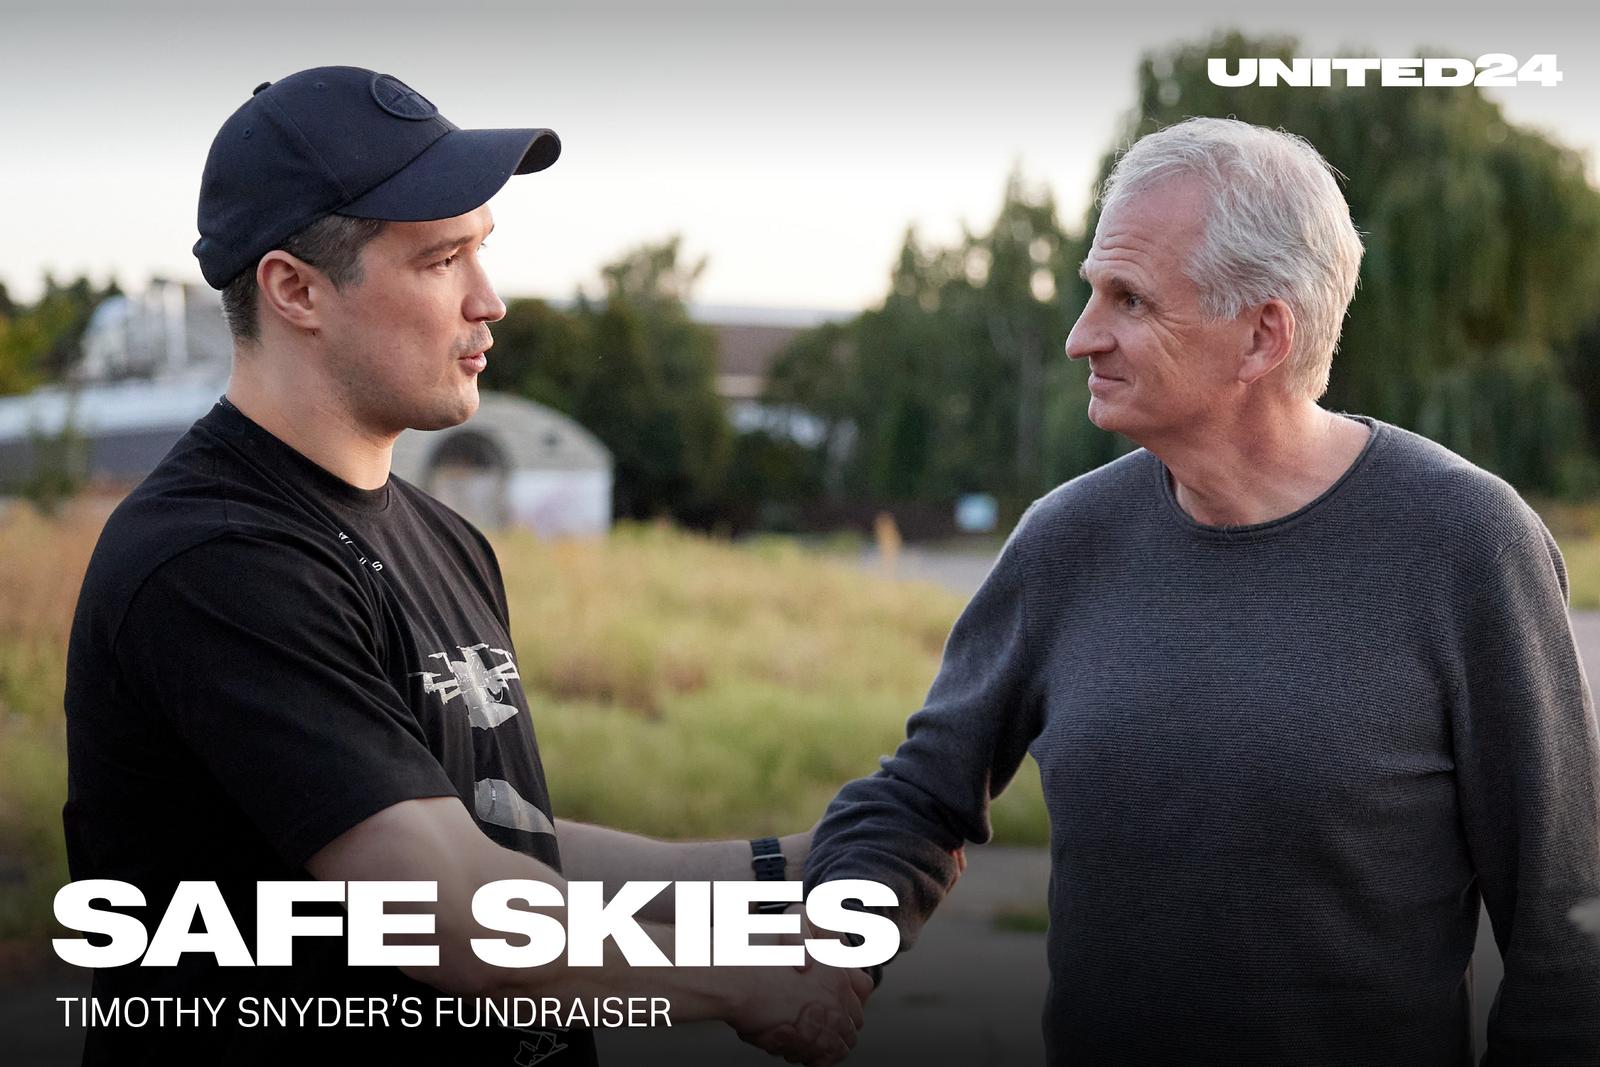 Join Timothy Snyder to protect Ukrainian skies